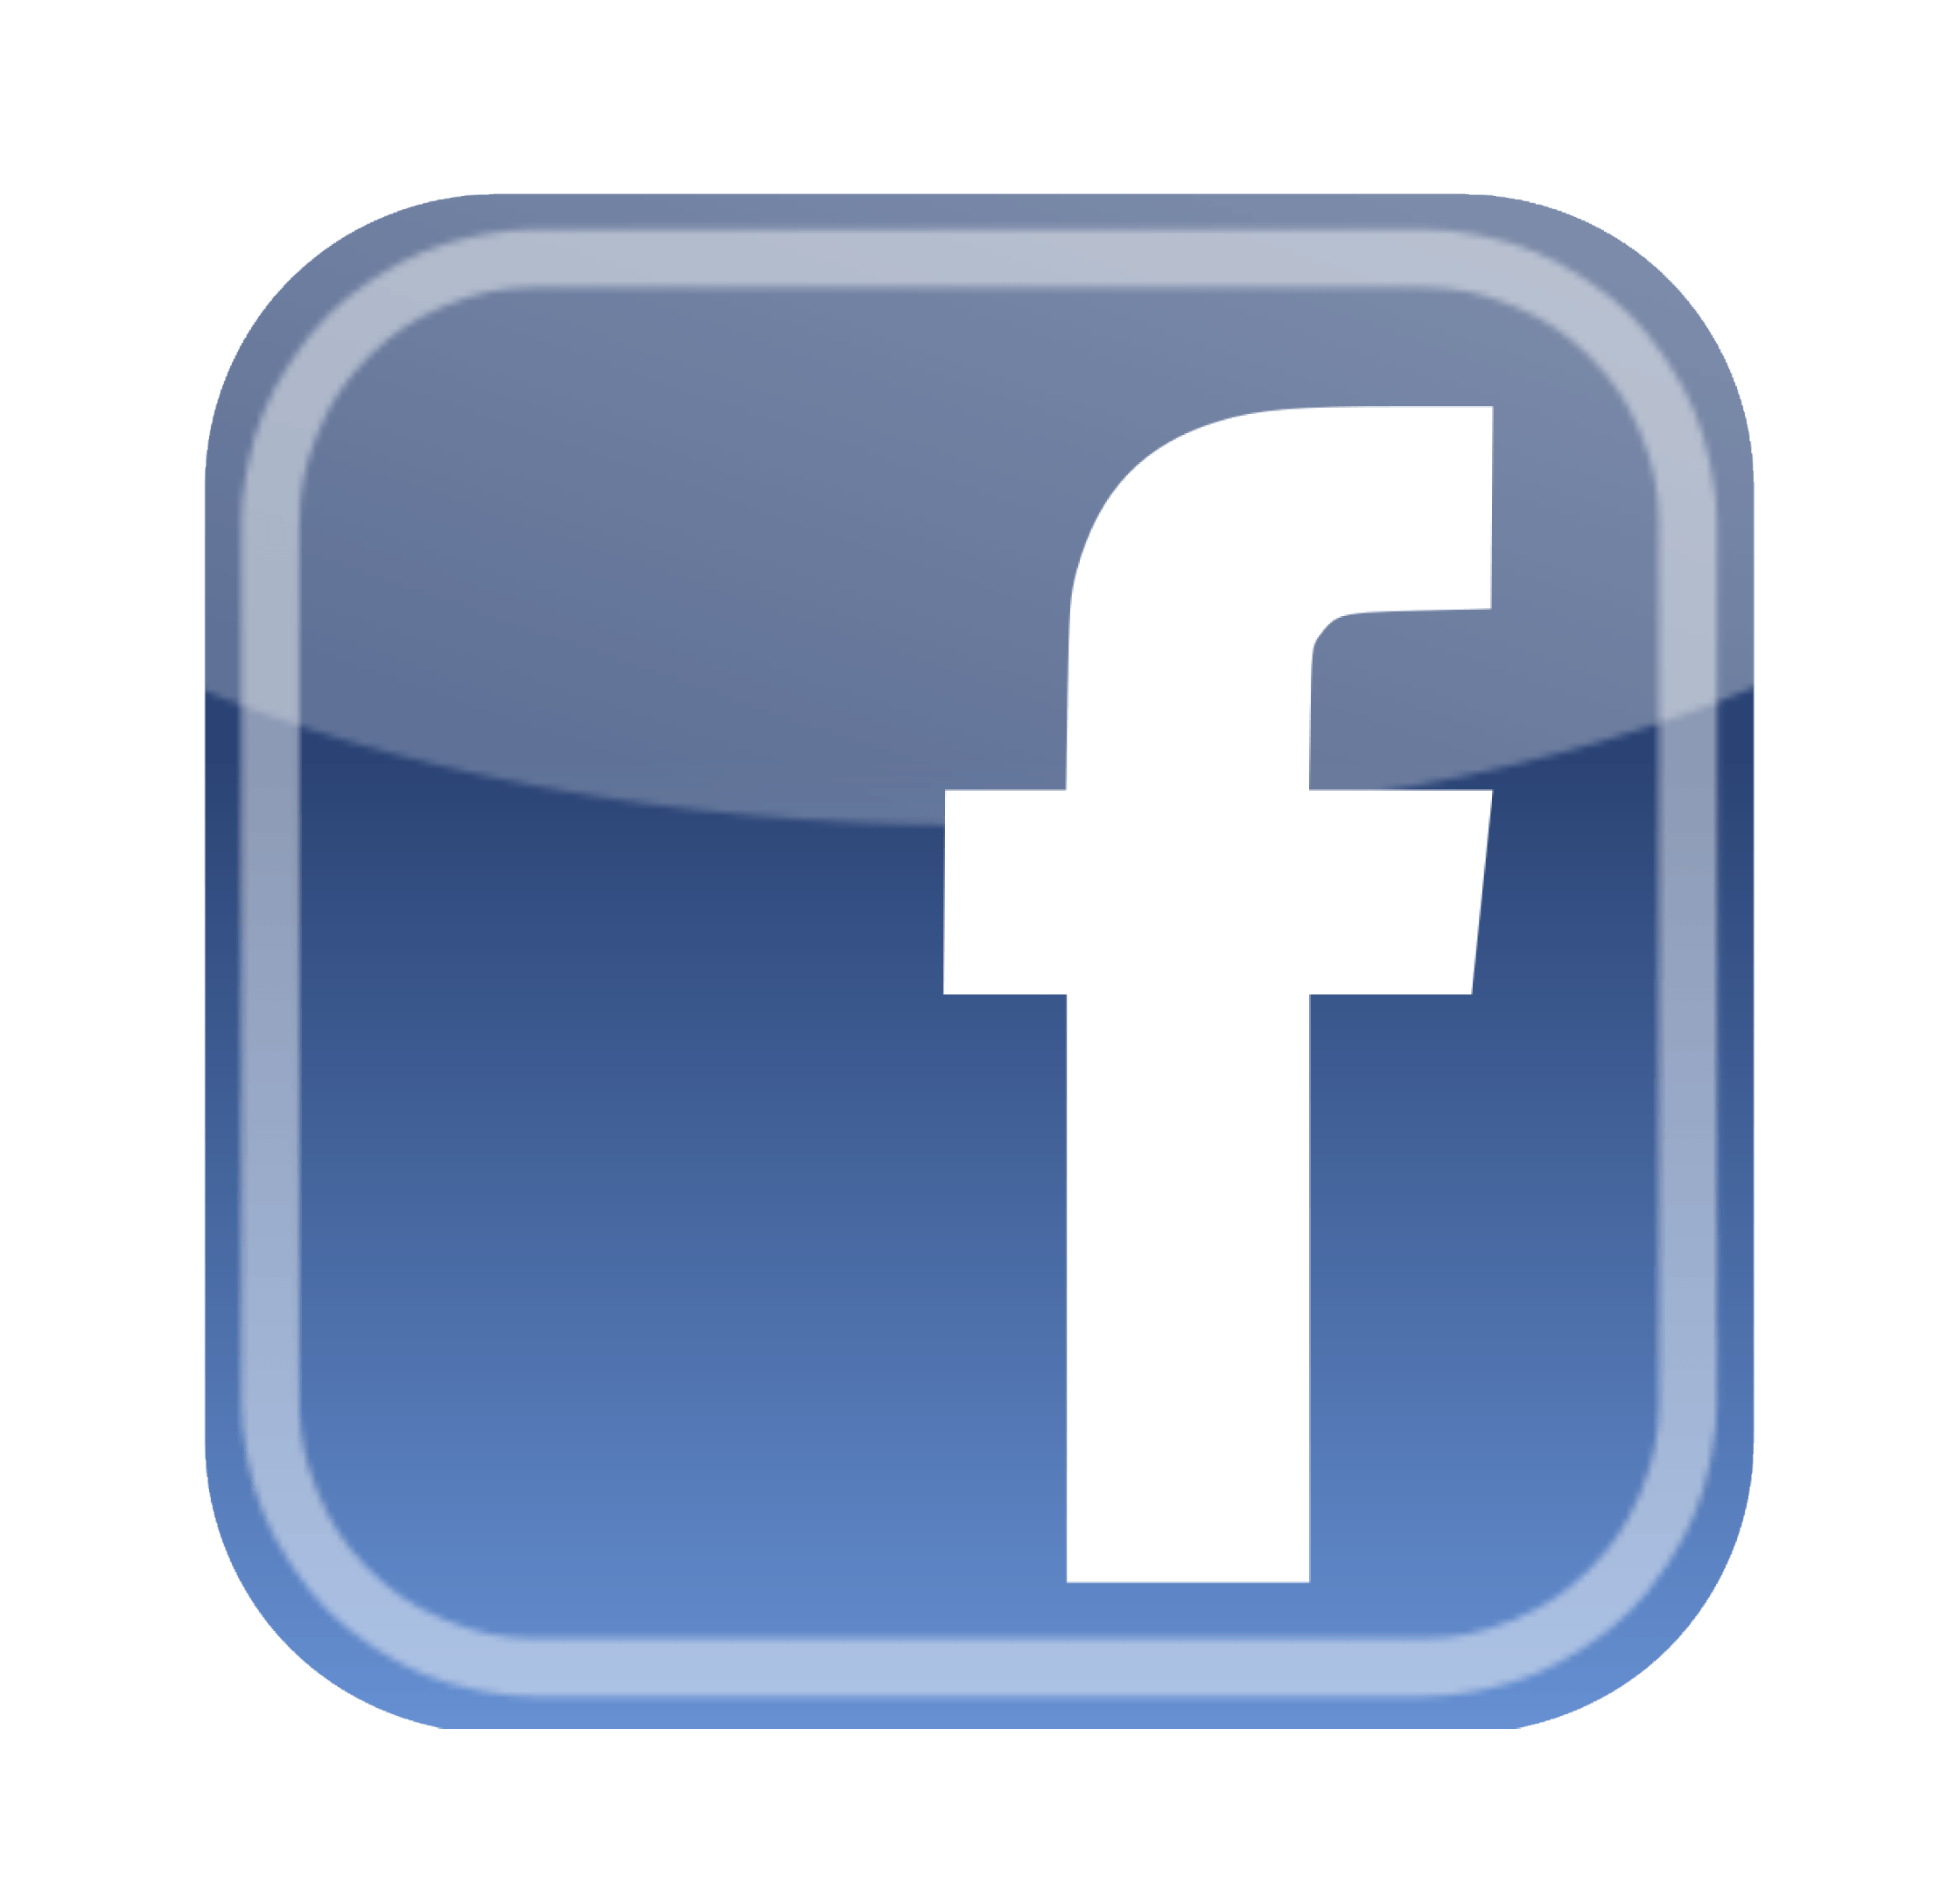 Facebook App Logo - Facebook Logo Transparent PNG Pictures - Free Icons and PNG Backgrounds